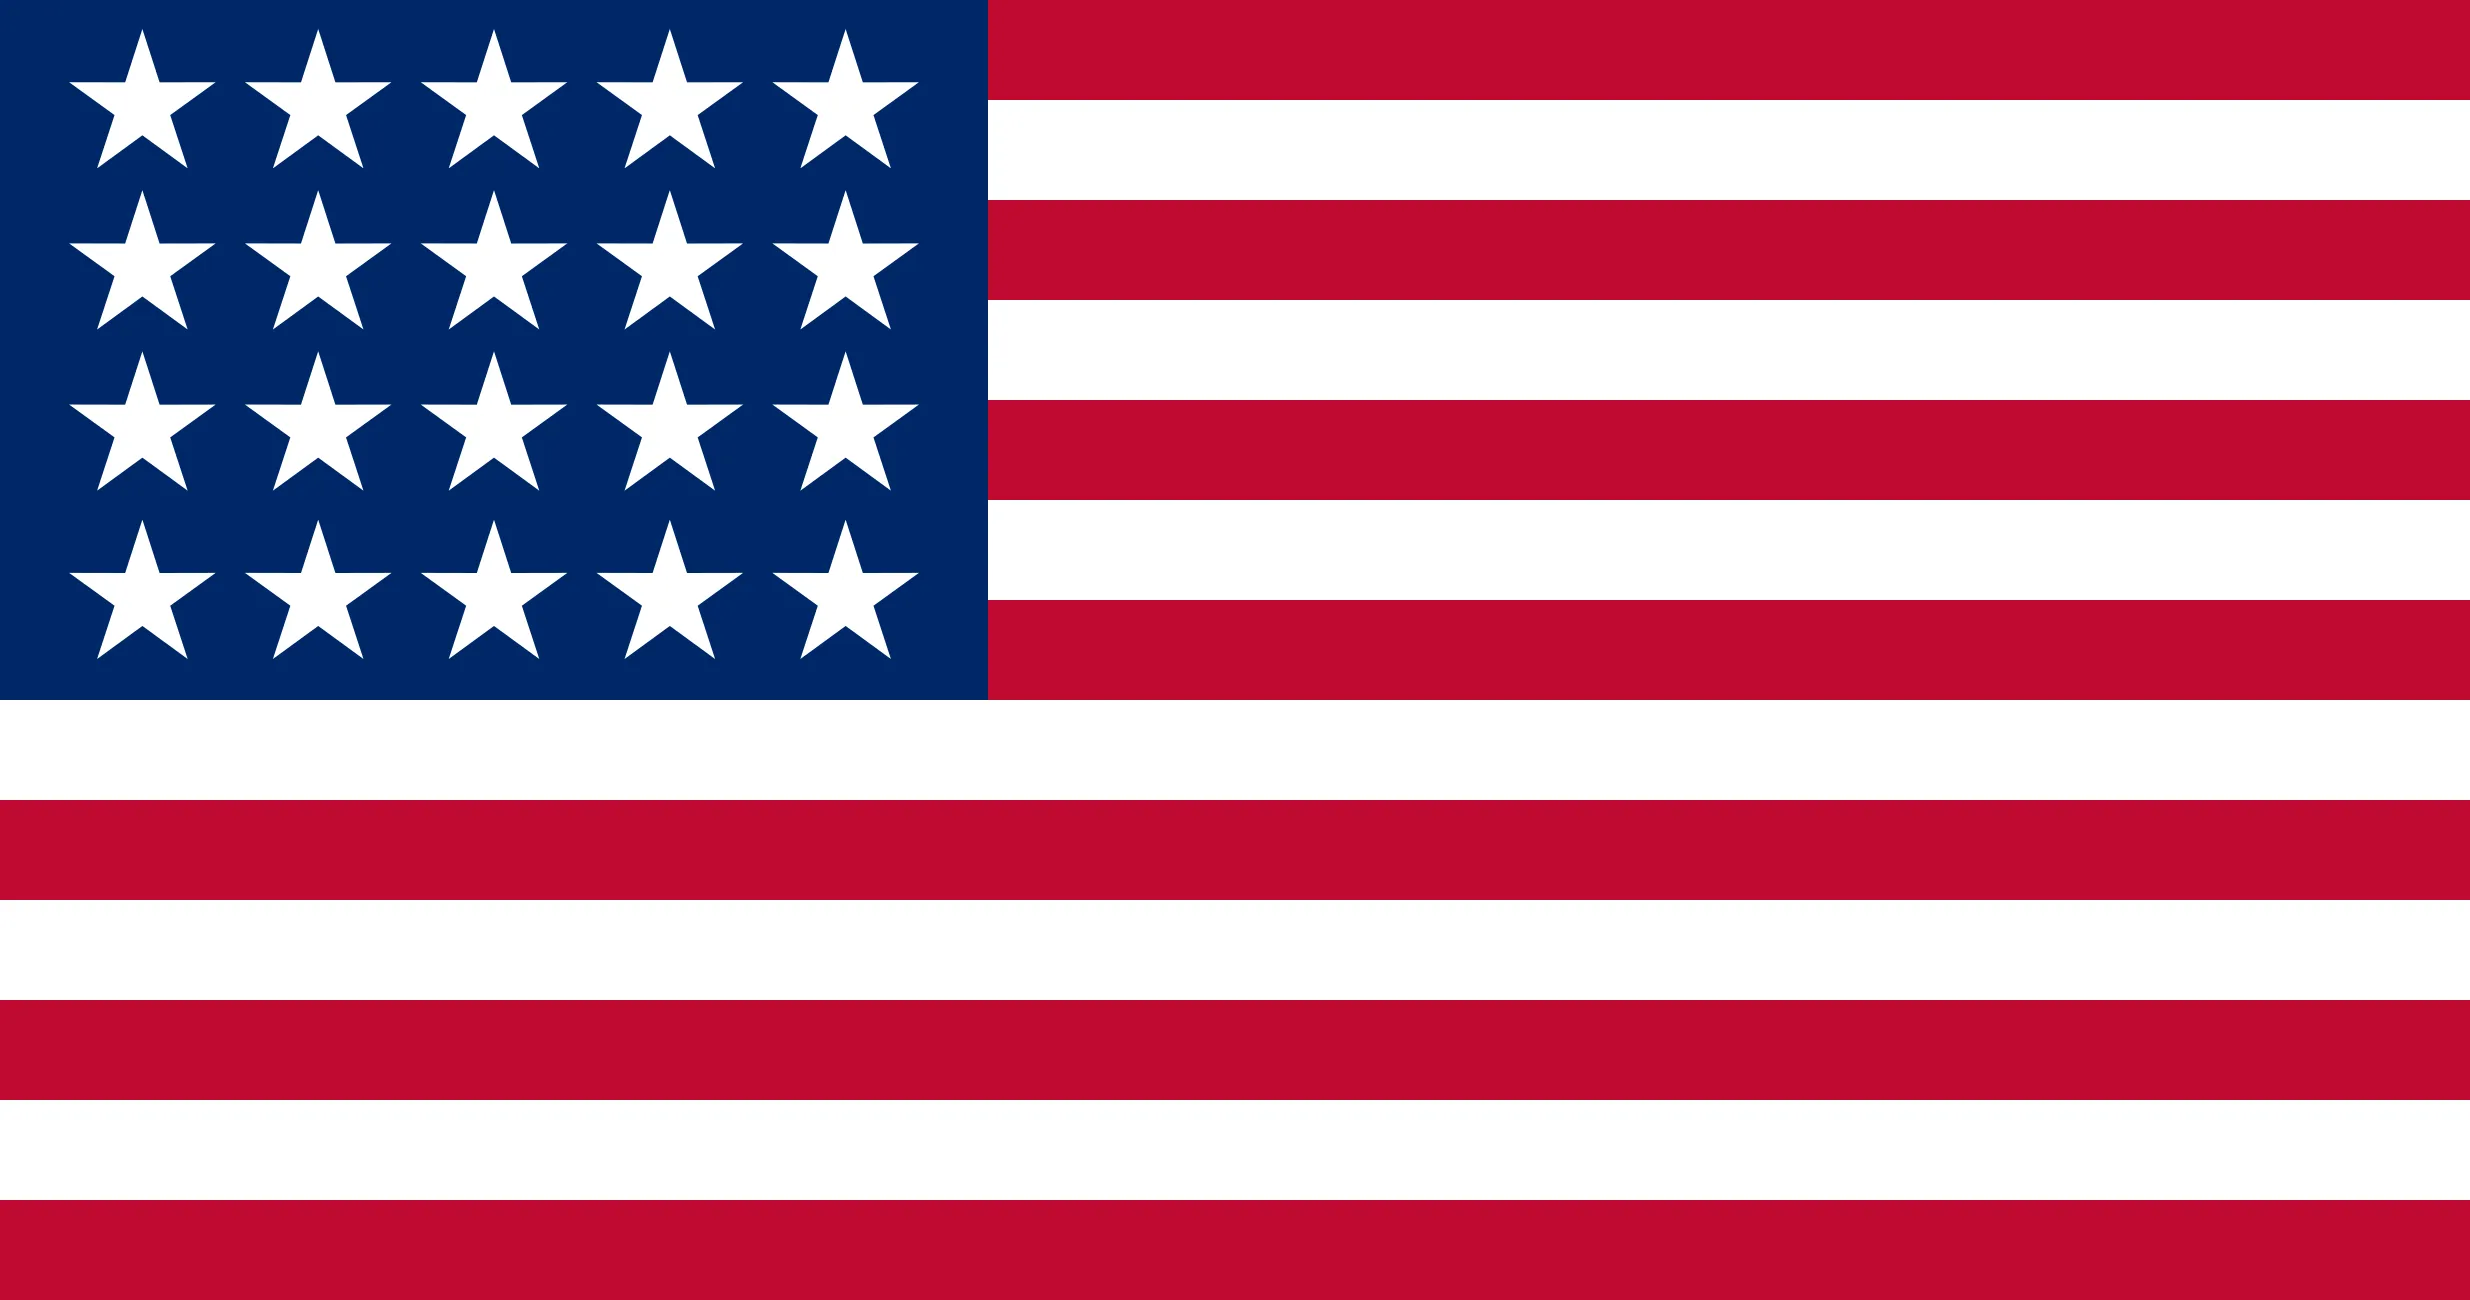 US Flag with 20 stars and 13 stripes